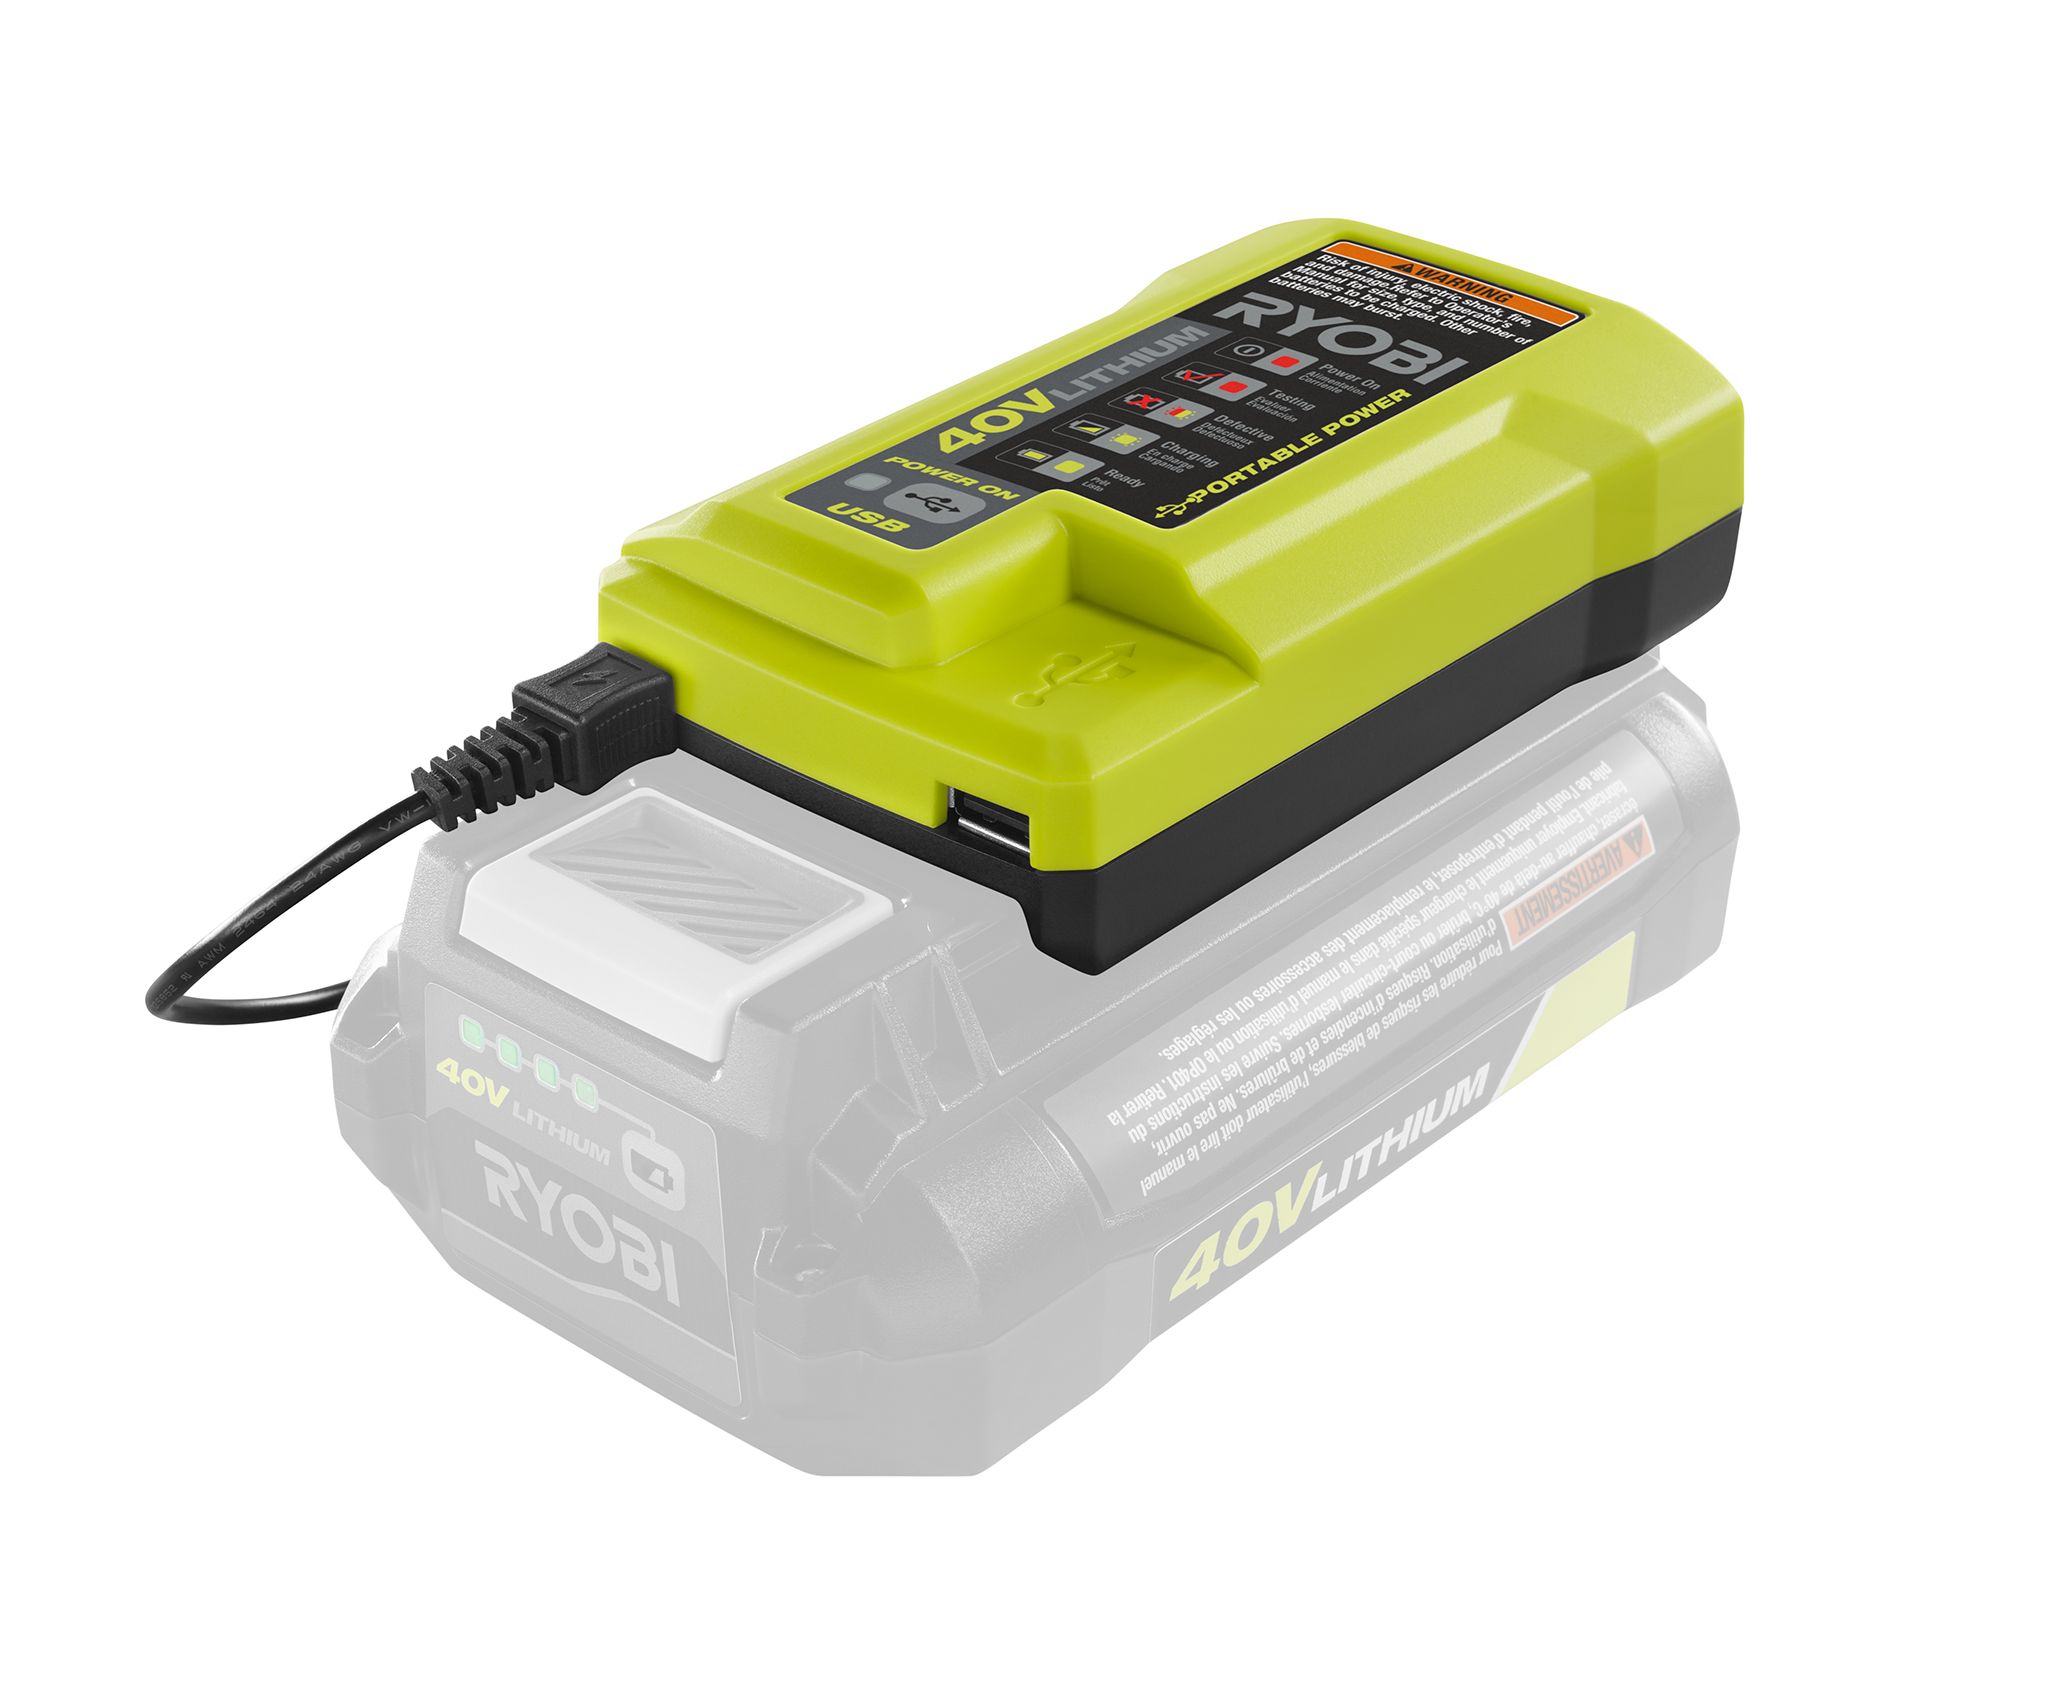 40V LITHIUM-ION 6.0AH HIGH CAPACITY BATTERY AND CHARGER KIT